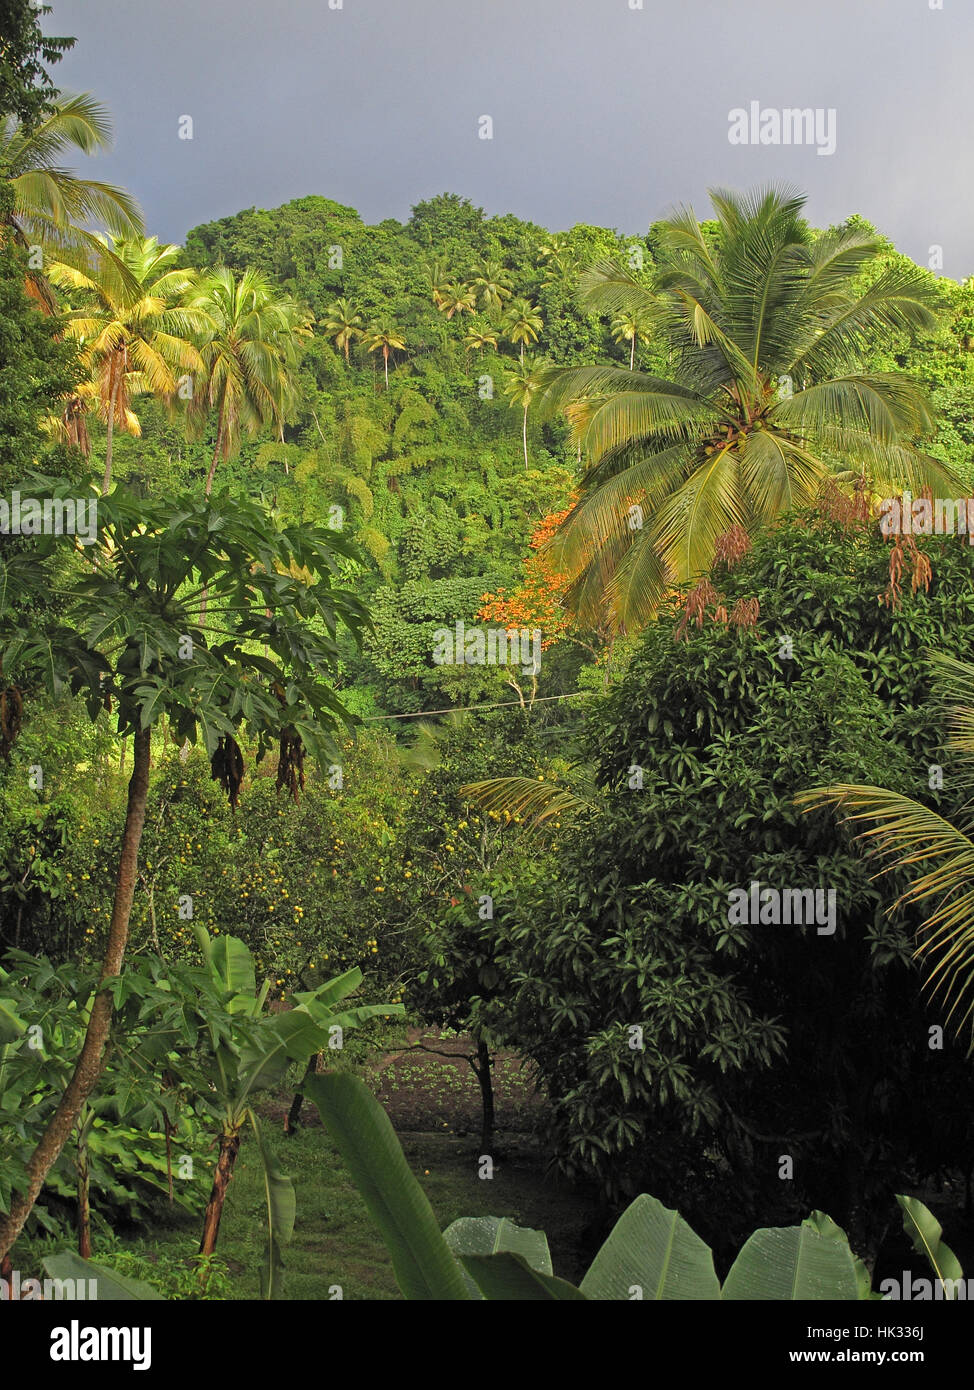 view through orchard to hillside on stormy day  Fond Doux Plantation, St Lucia, Lesser Antilles   December Stock Photo